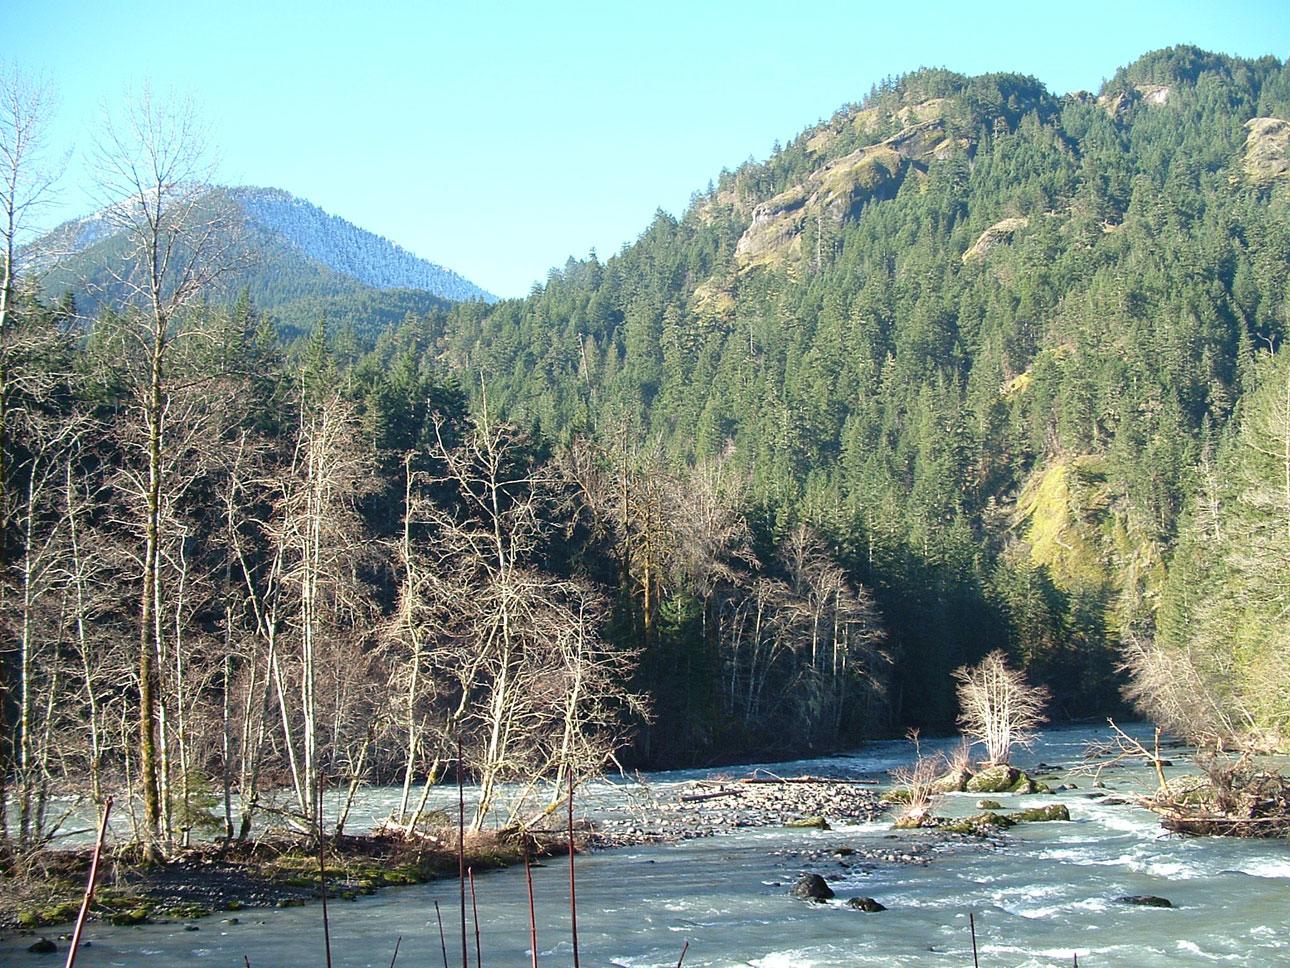 Sandee - Mouth Of Elwha River